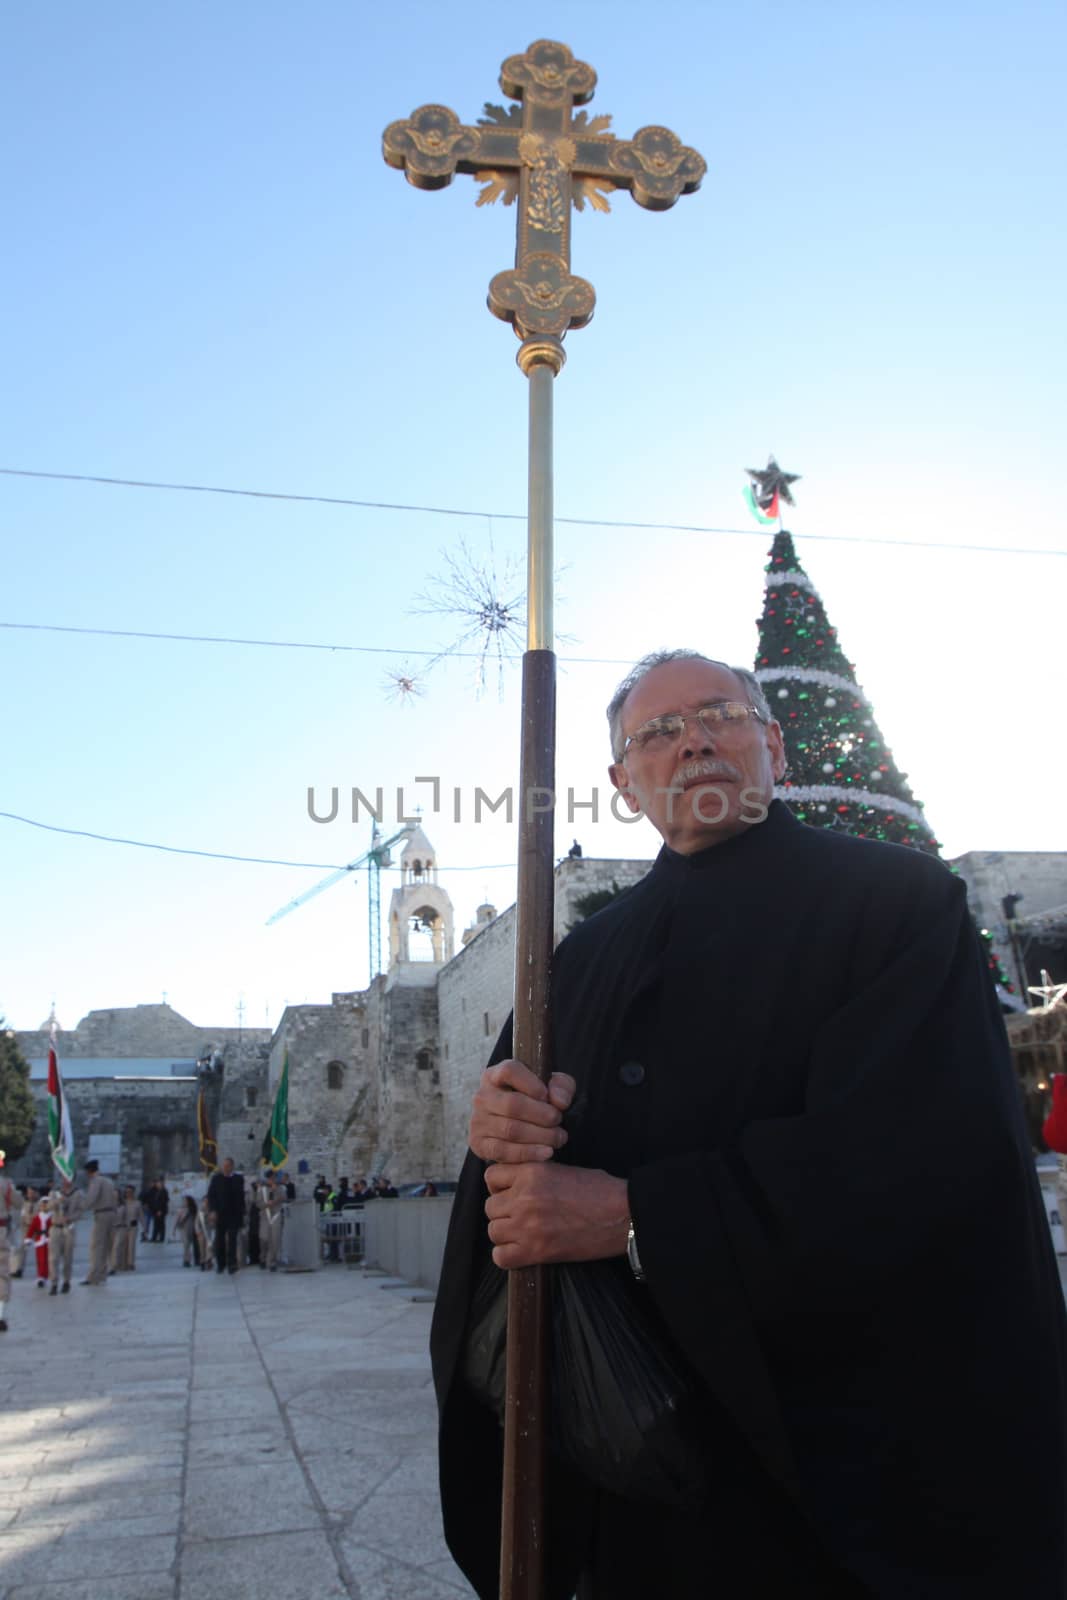 WEST BANK, Bethlehem: An Orthodox Christian Palestinian of holds a cross before the Christmas Eve procession in Bethlehem, the West Bank on January 6, 2016. The celebration is held in accordance with the Julian calendar, which places Christmas on January 7, nearly two weeks after many Christians have celebrated the holiday on December 25.